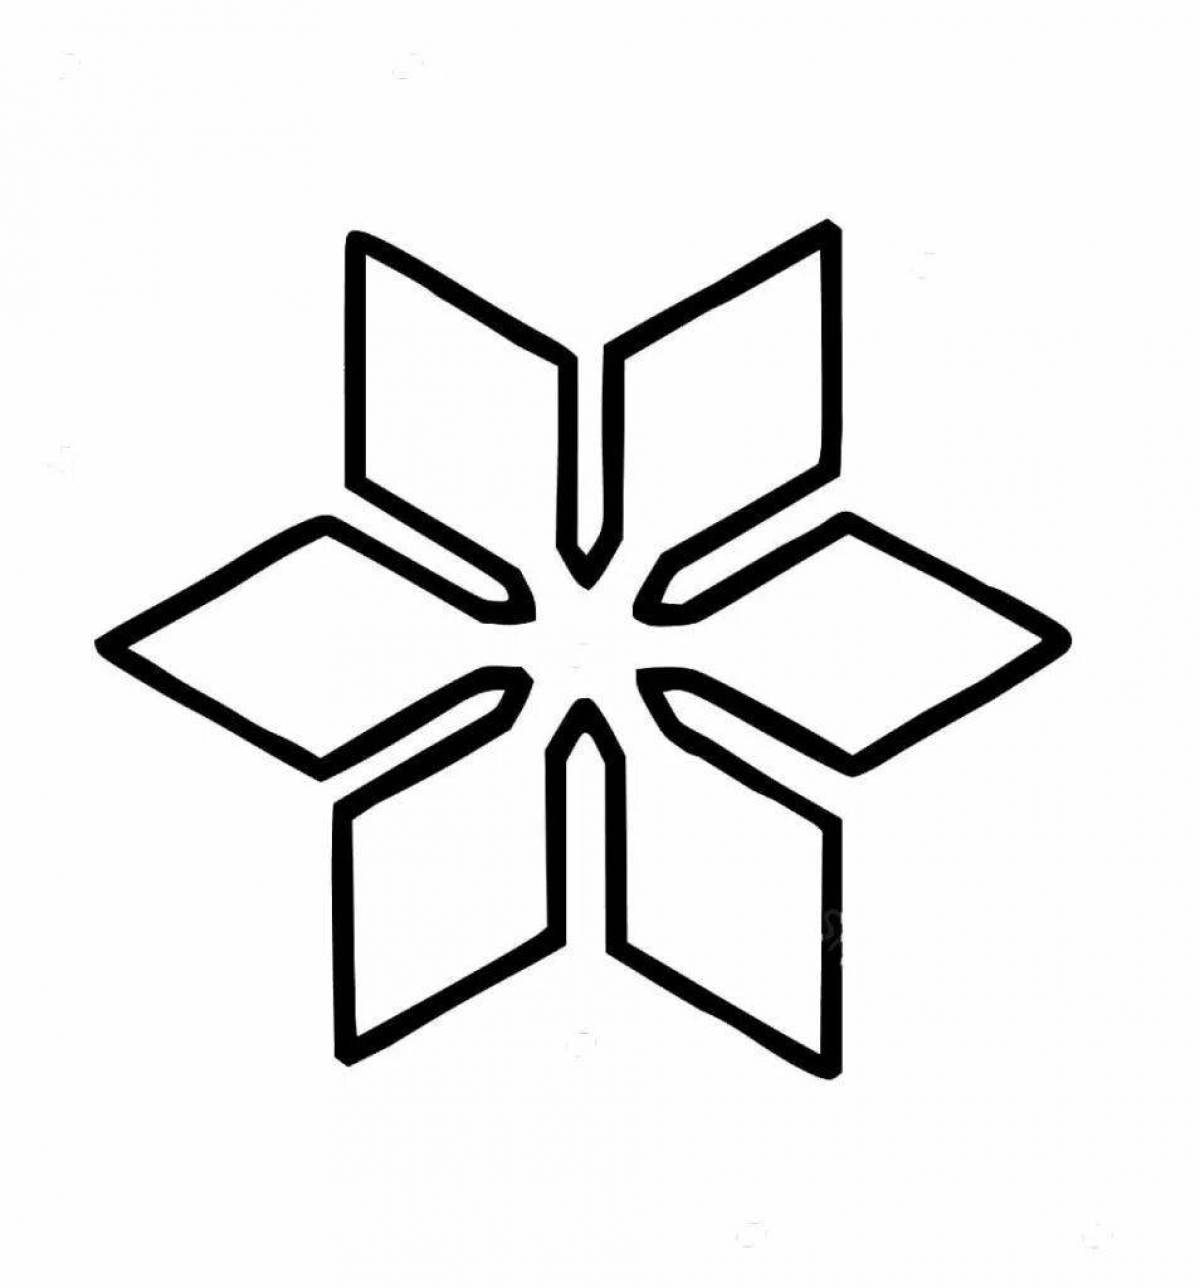 Glowing snowflake coloring book for children 3-4 years old